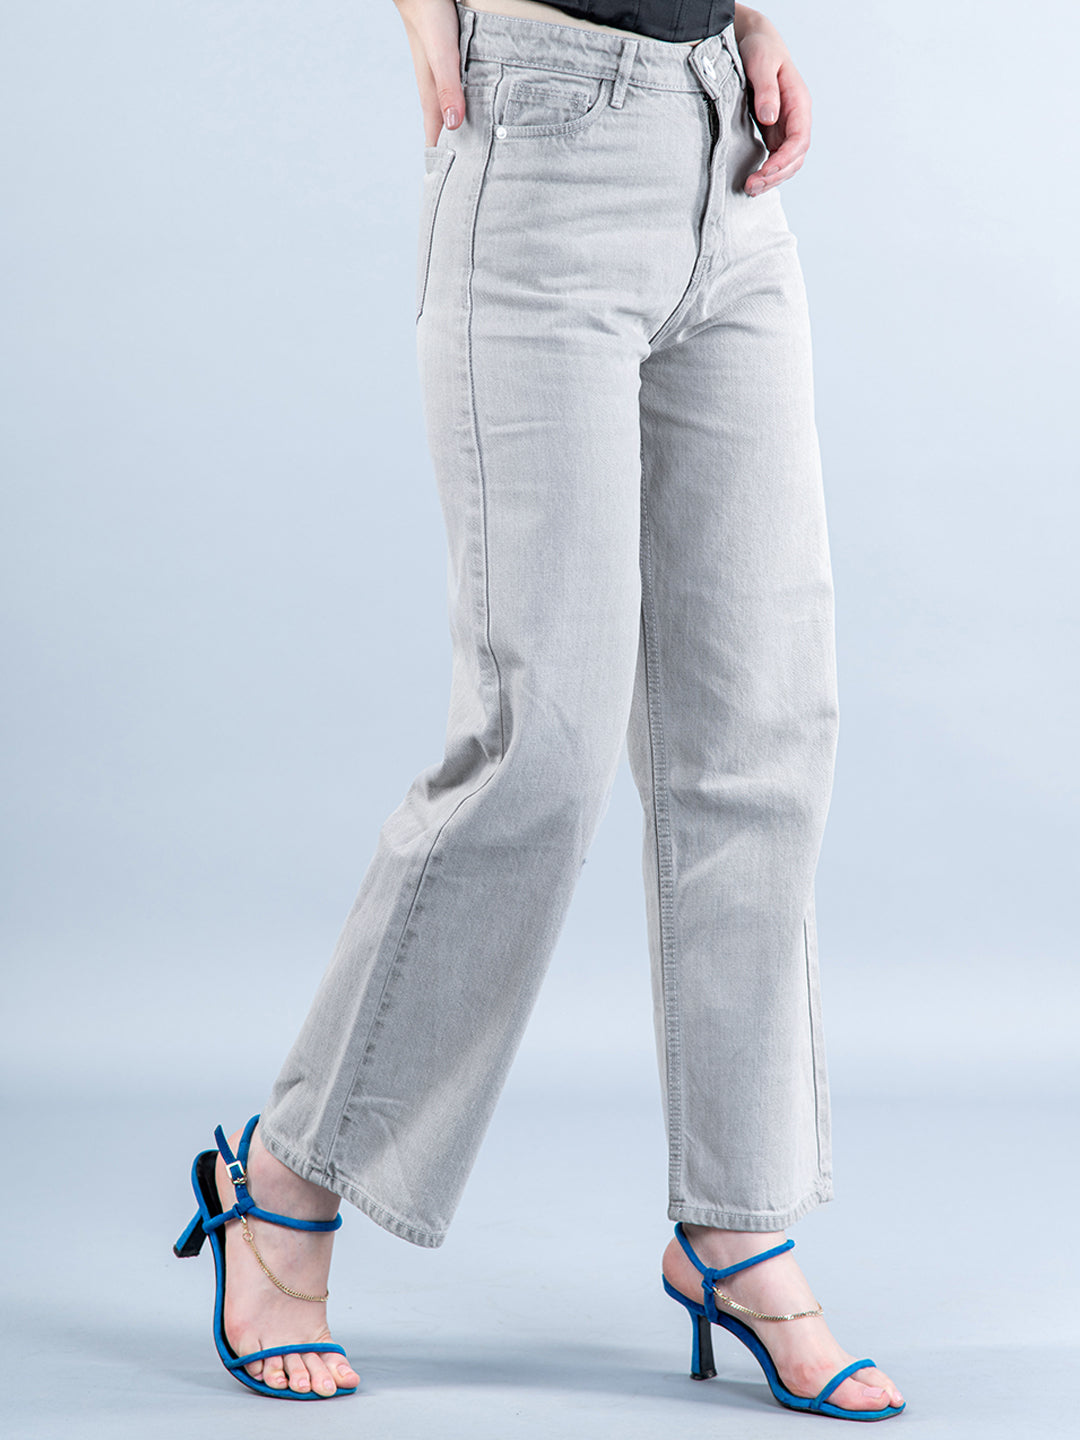 mid rise jeans womens